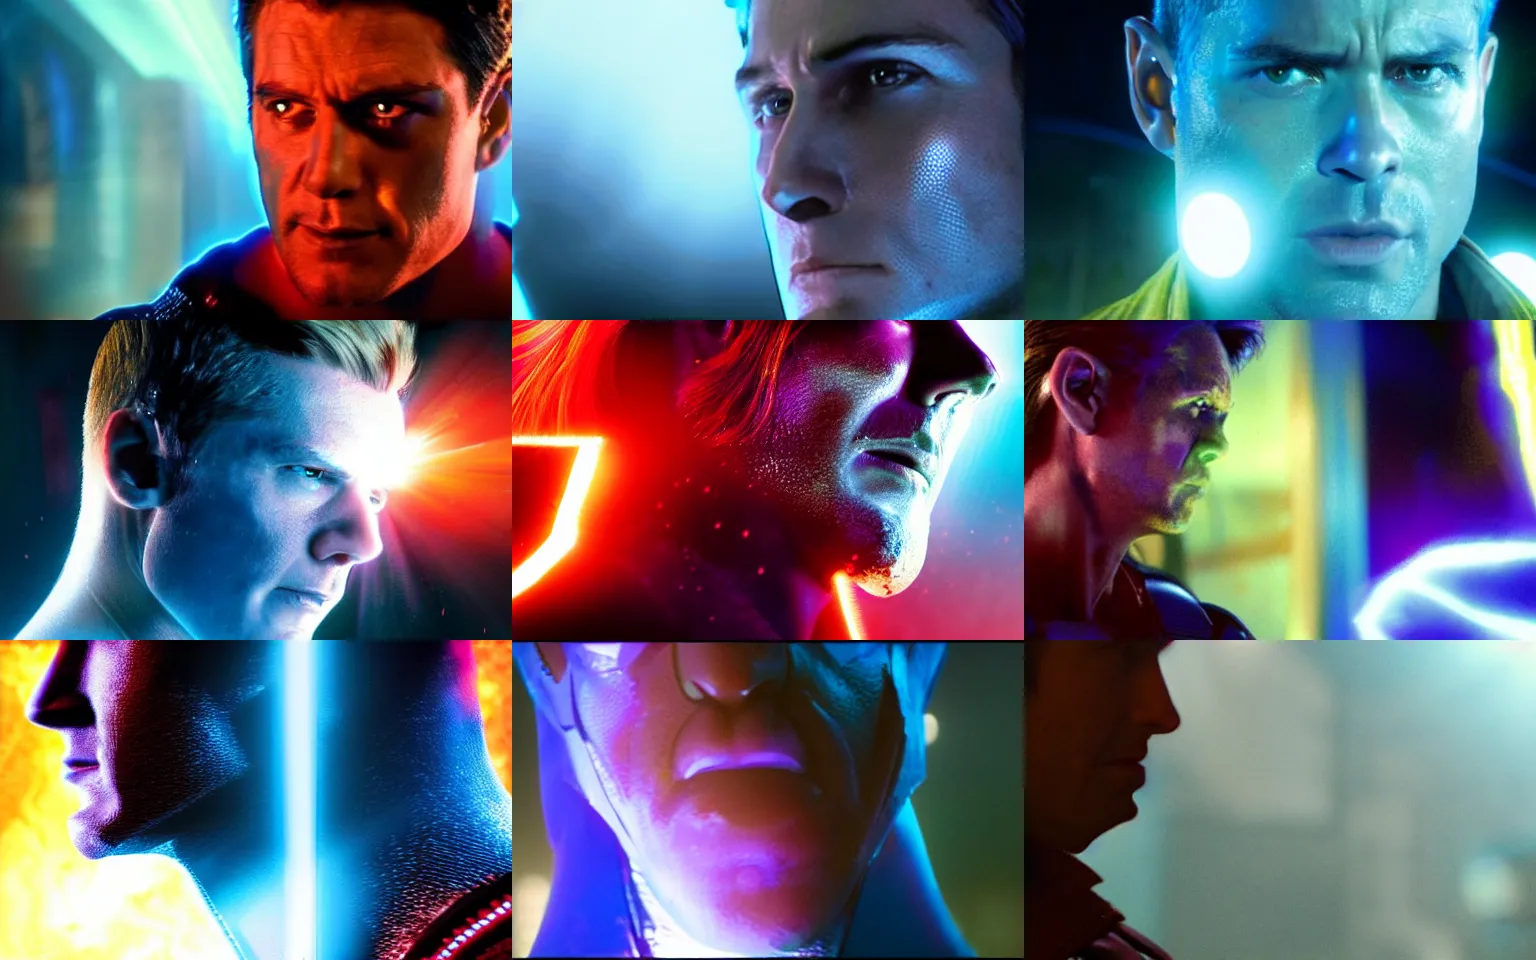 Prompt: still frame from blockbuster comicbook movie showing a closeup of a character, their face in profile, showcasing impressive groundbreaking cgi with subsurface illumination effects which make the character appear to be made of cherenkov radiation.